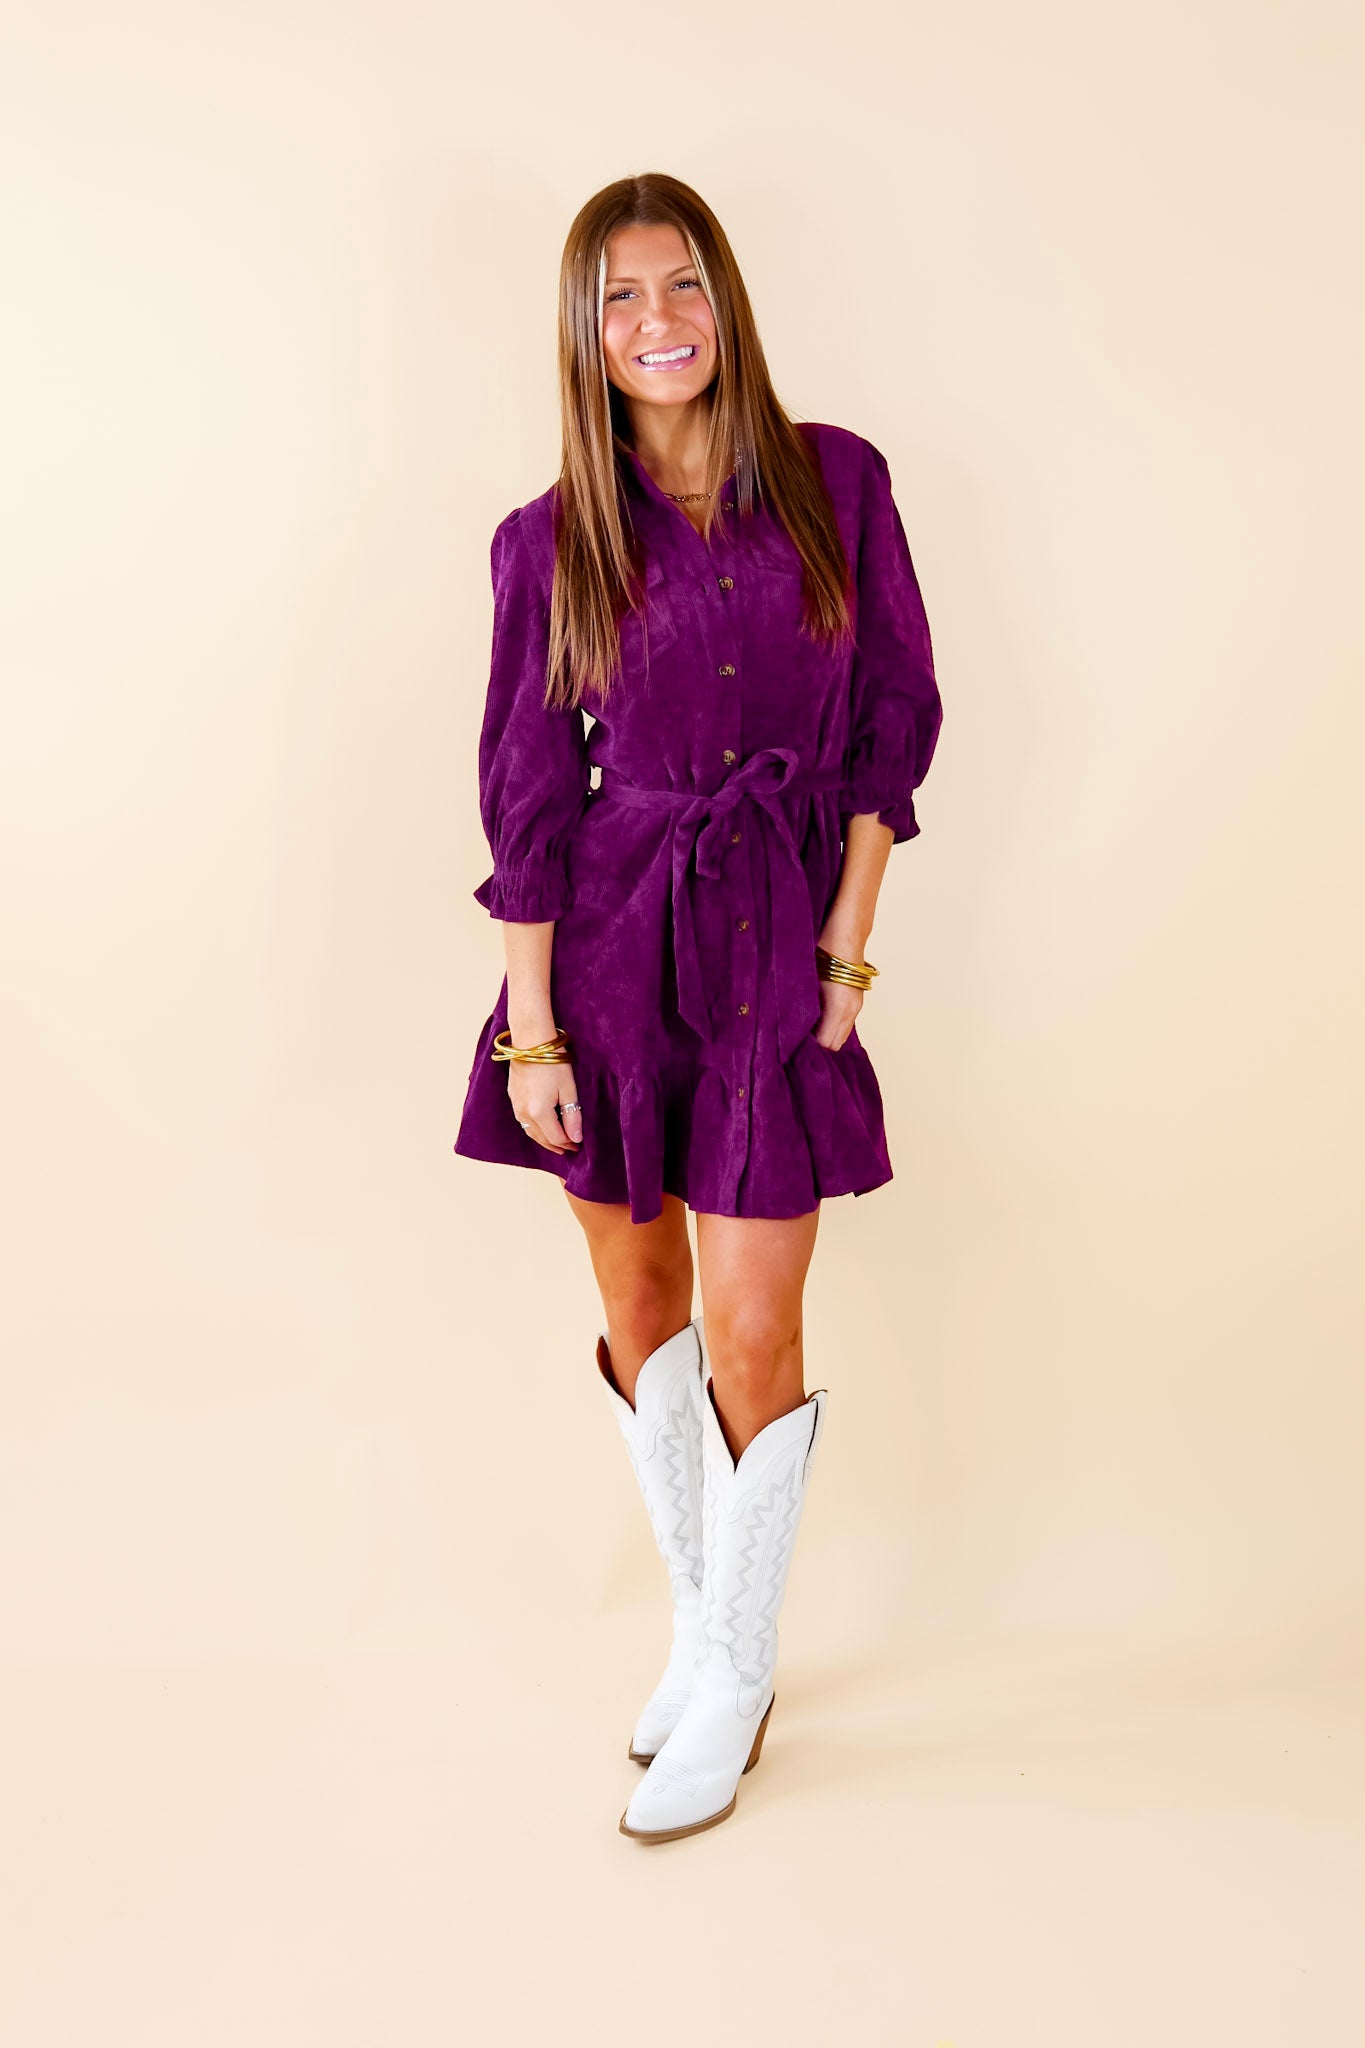 Cinnamon Lane Button Up Corduroy Dress with Waist Tie in Violet Purple - Giddy Up Glamour Boutique